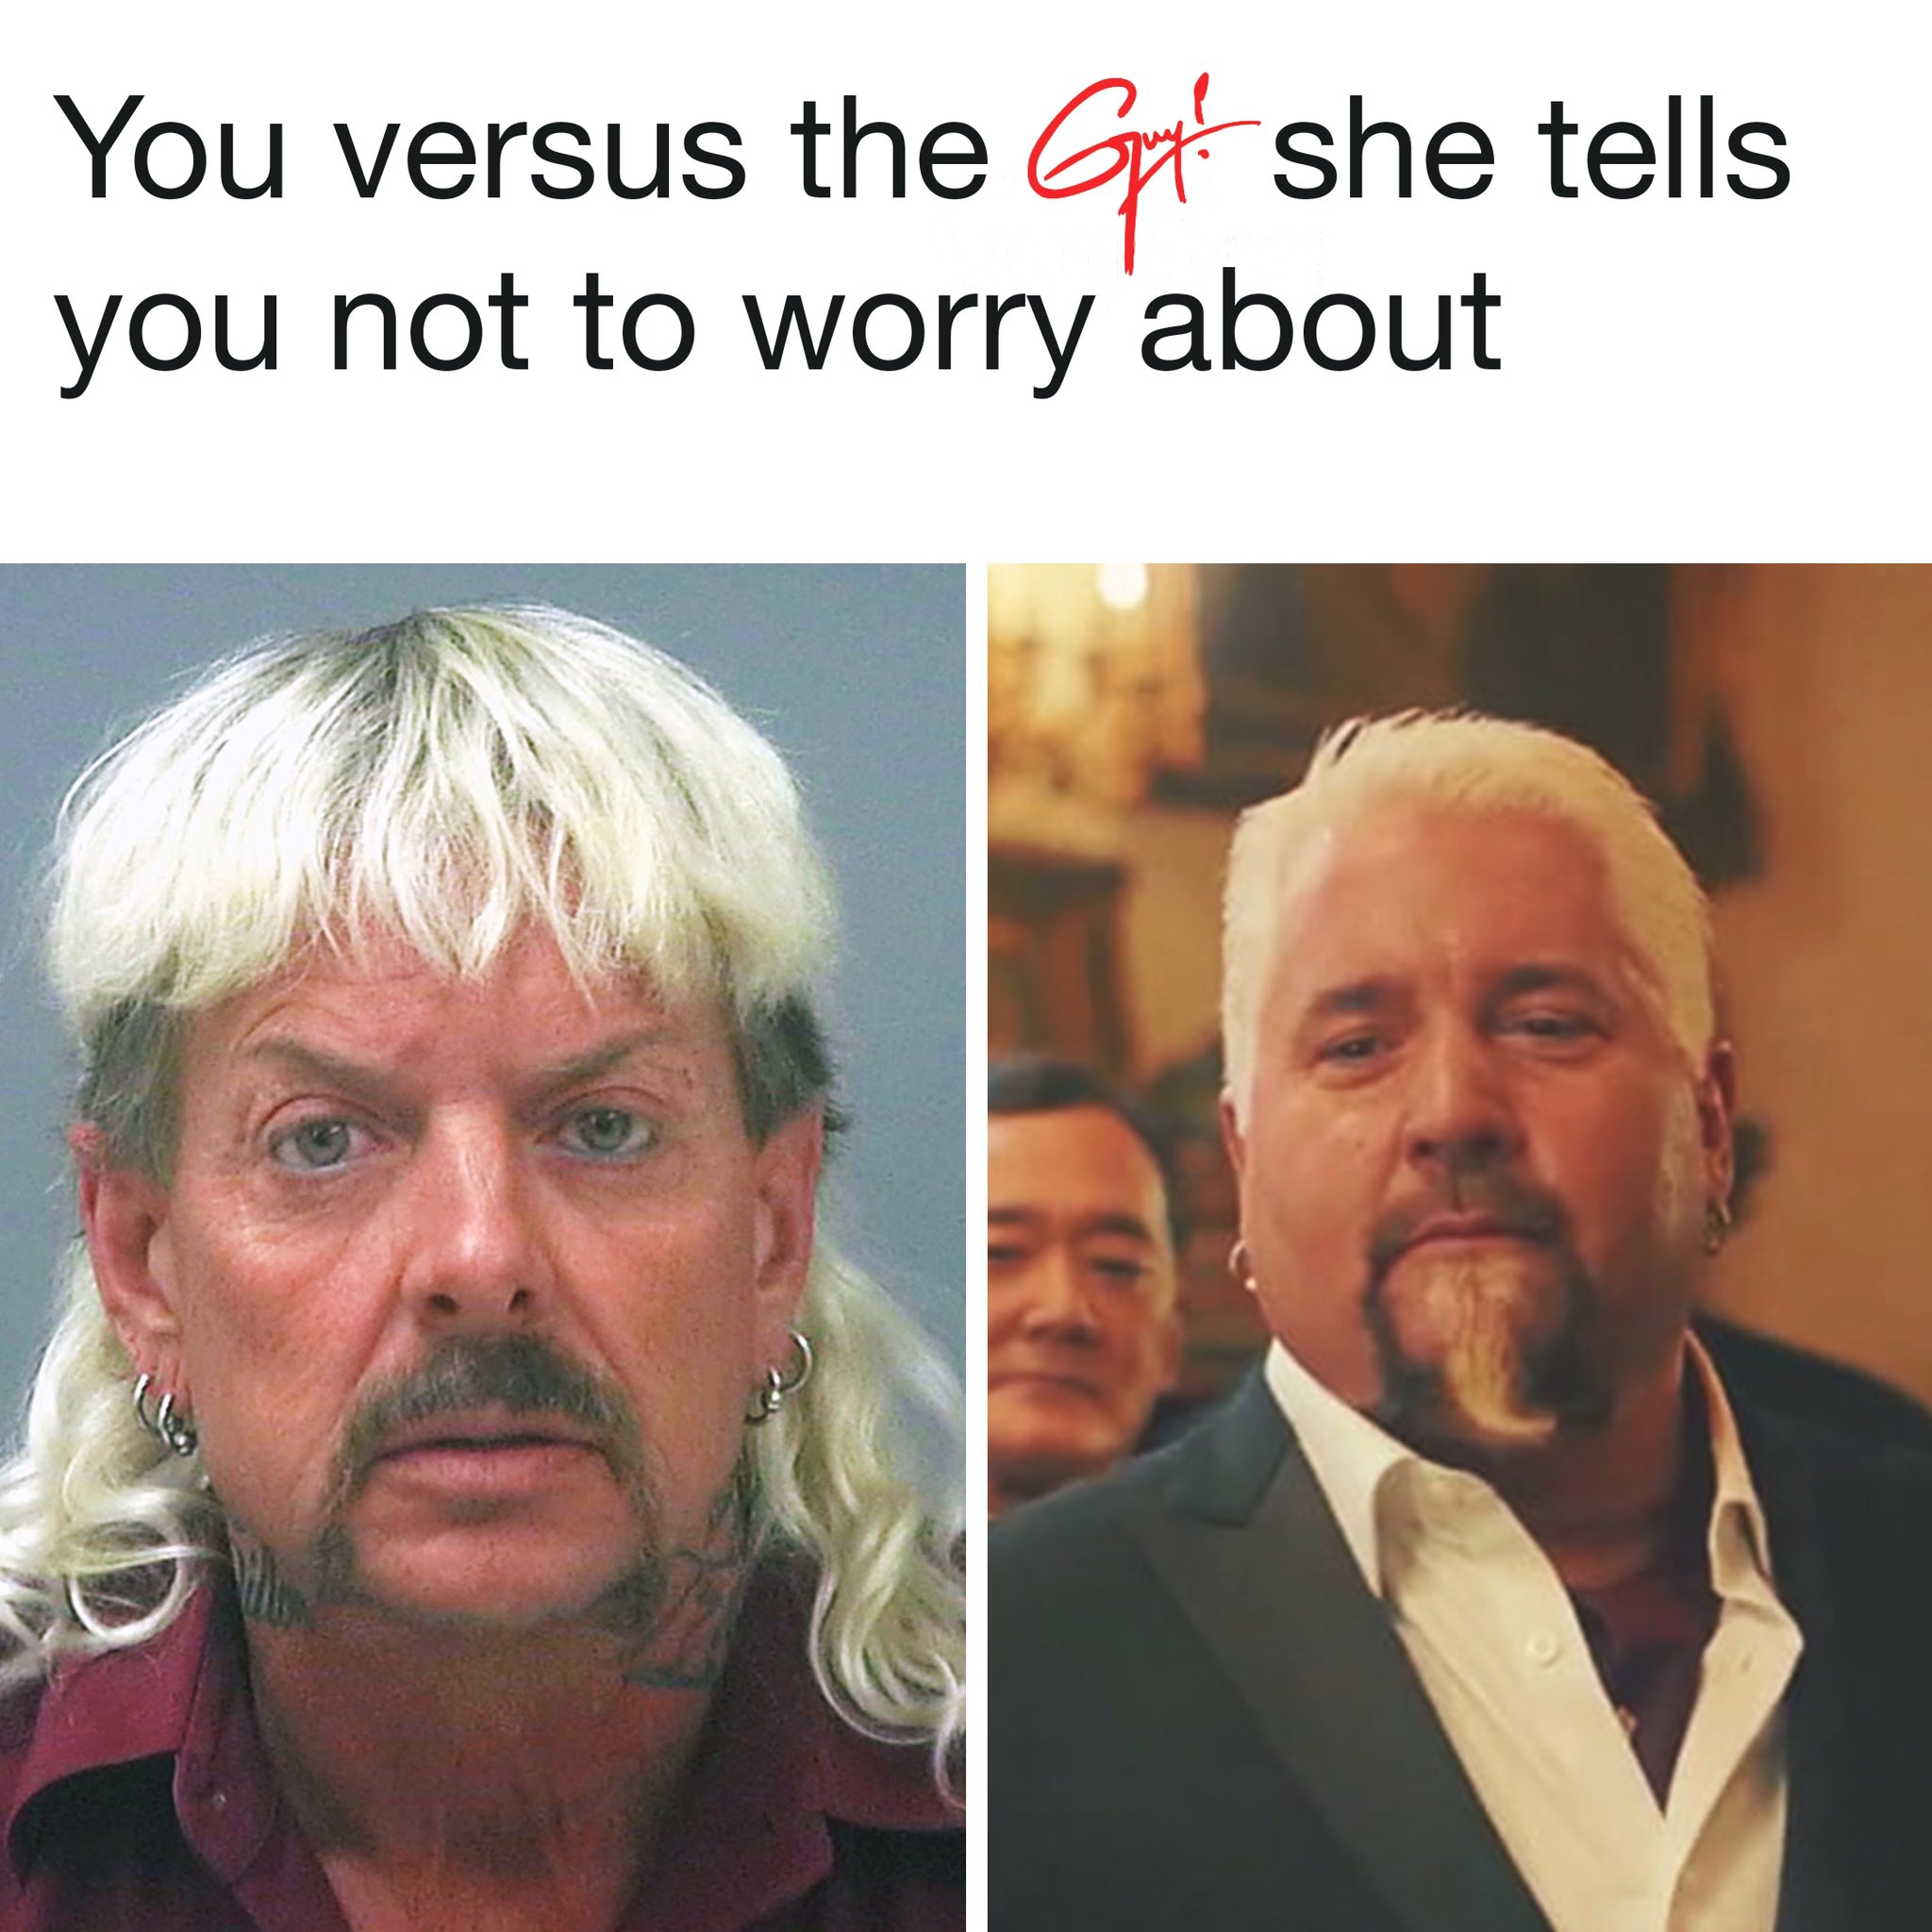 guy fieri crossover memes - you versus the guy she tells you not to worry about tiger king joe exotic